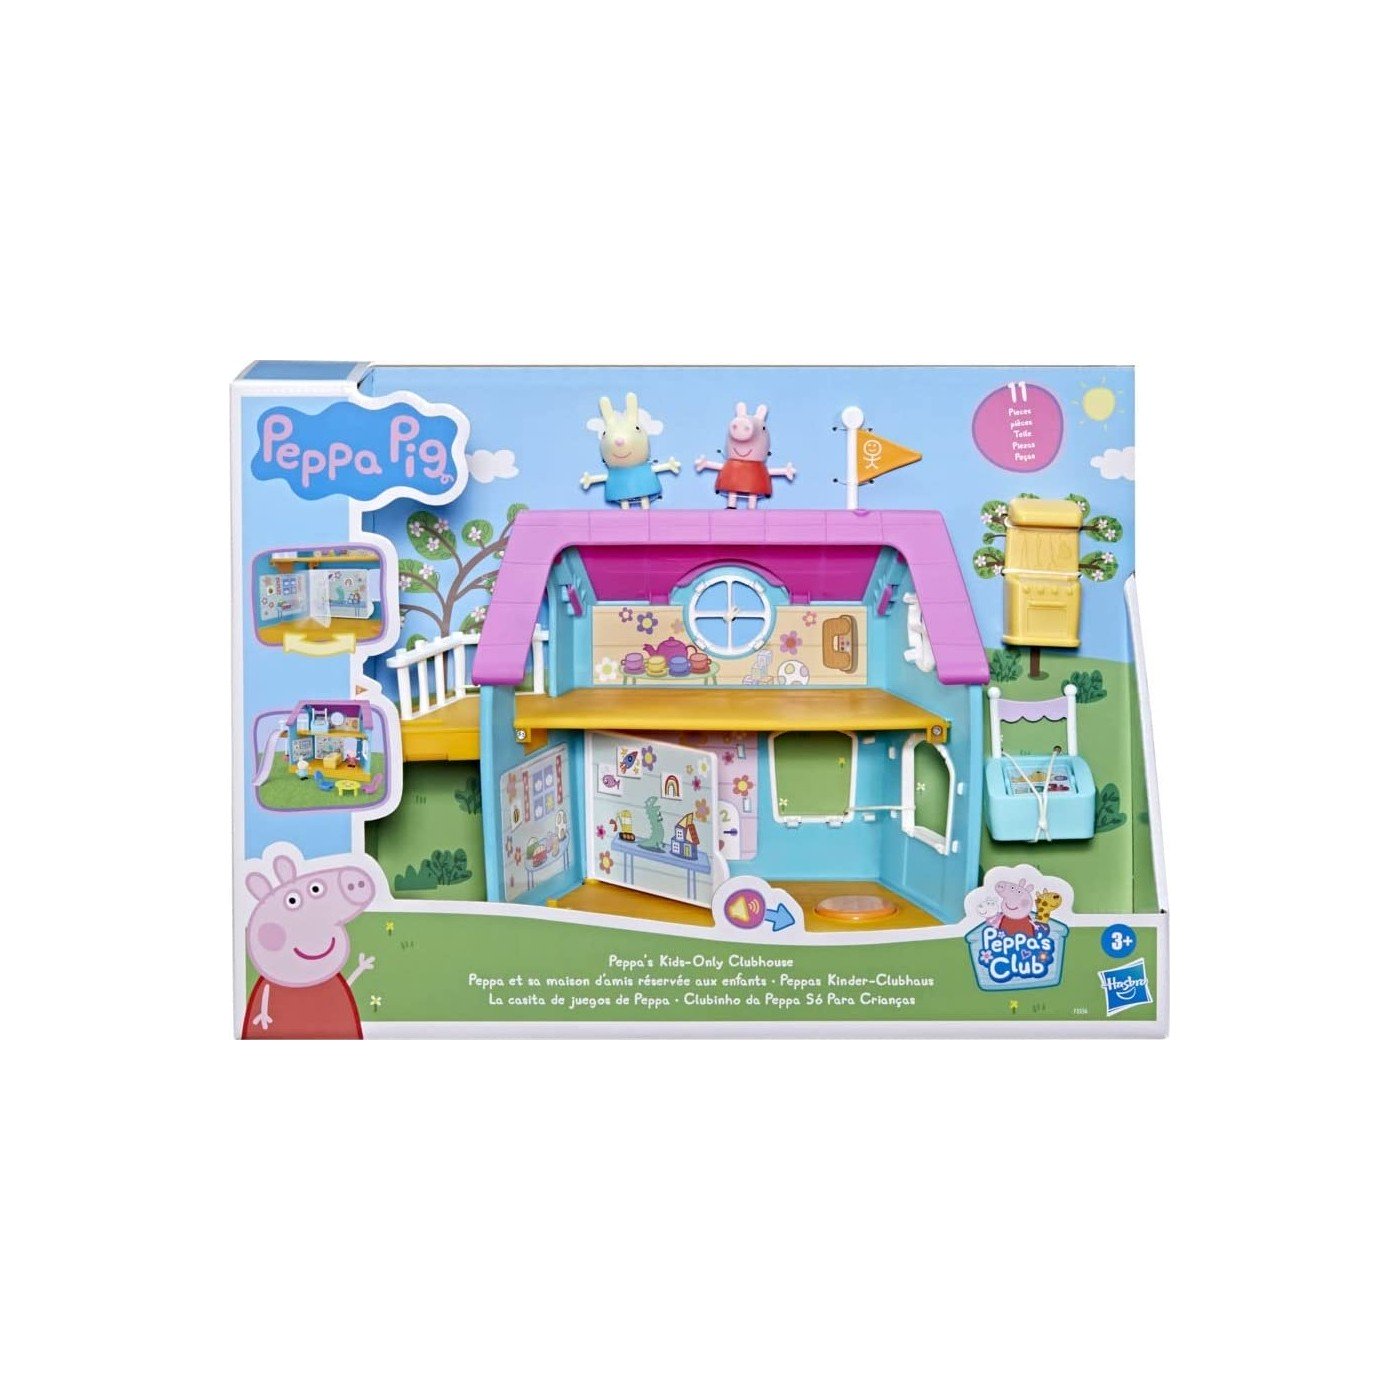 Peppa Pig Peppas Club Kids-Only Clubhouse (F3556)